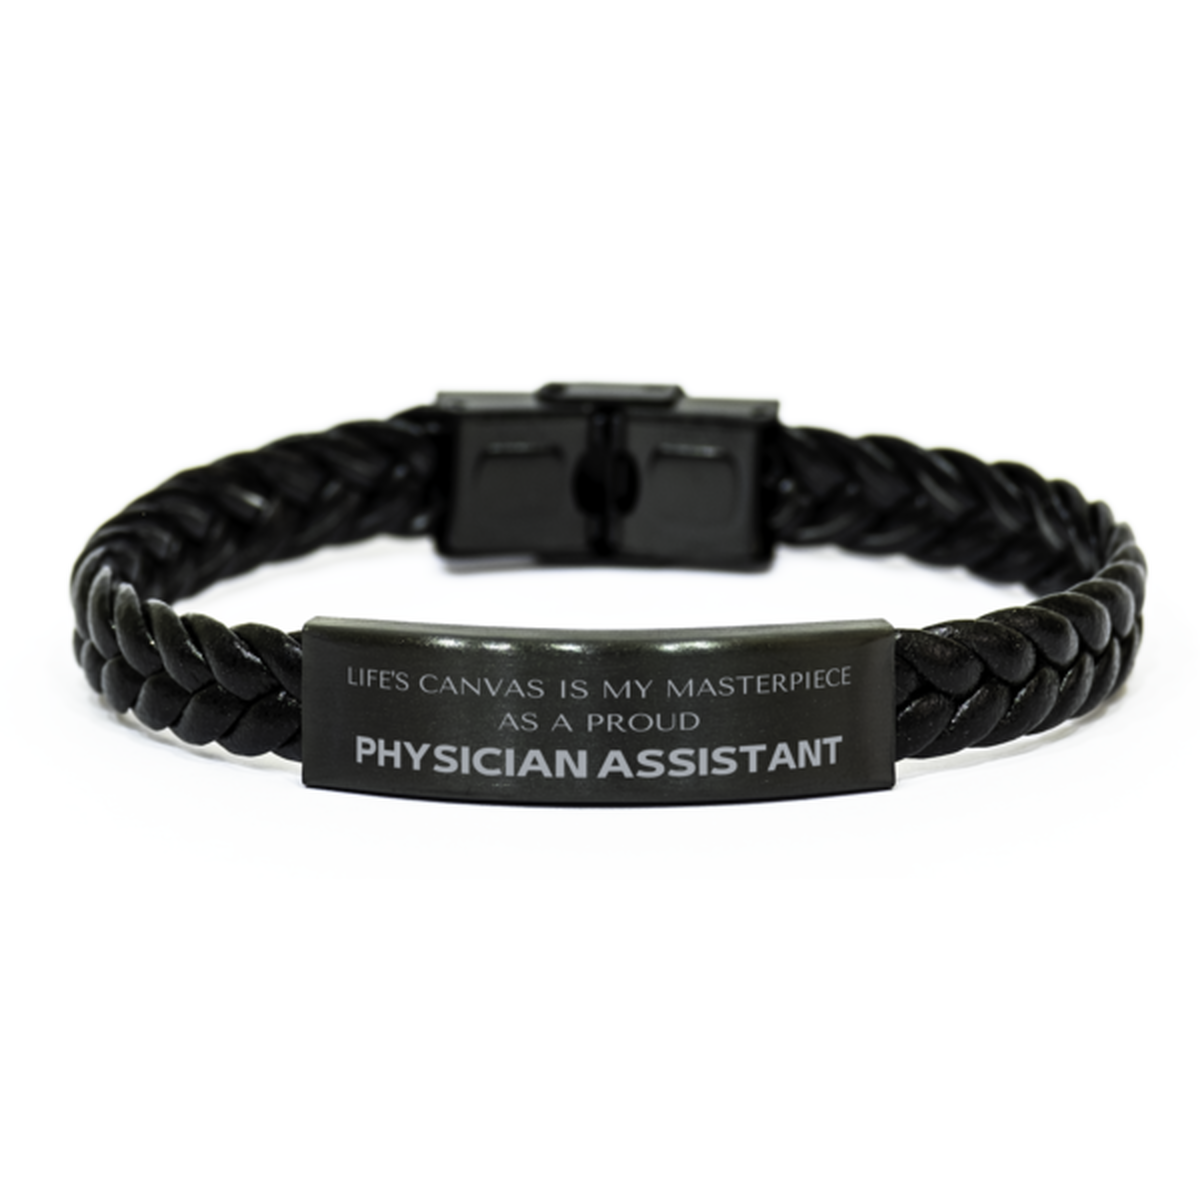 Proud Physician Assistant Gifts, Life's canvas is my masterpiece, Epic Birthday Christmas Unique Braided Leather Bracelet For Physician Assistant, Coworkers, Men, Women, Friends